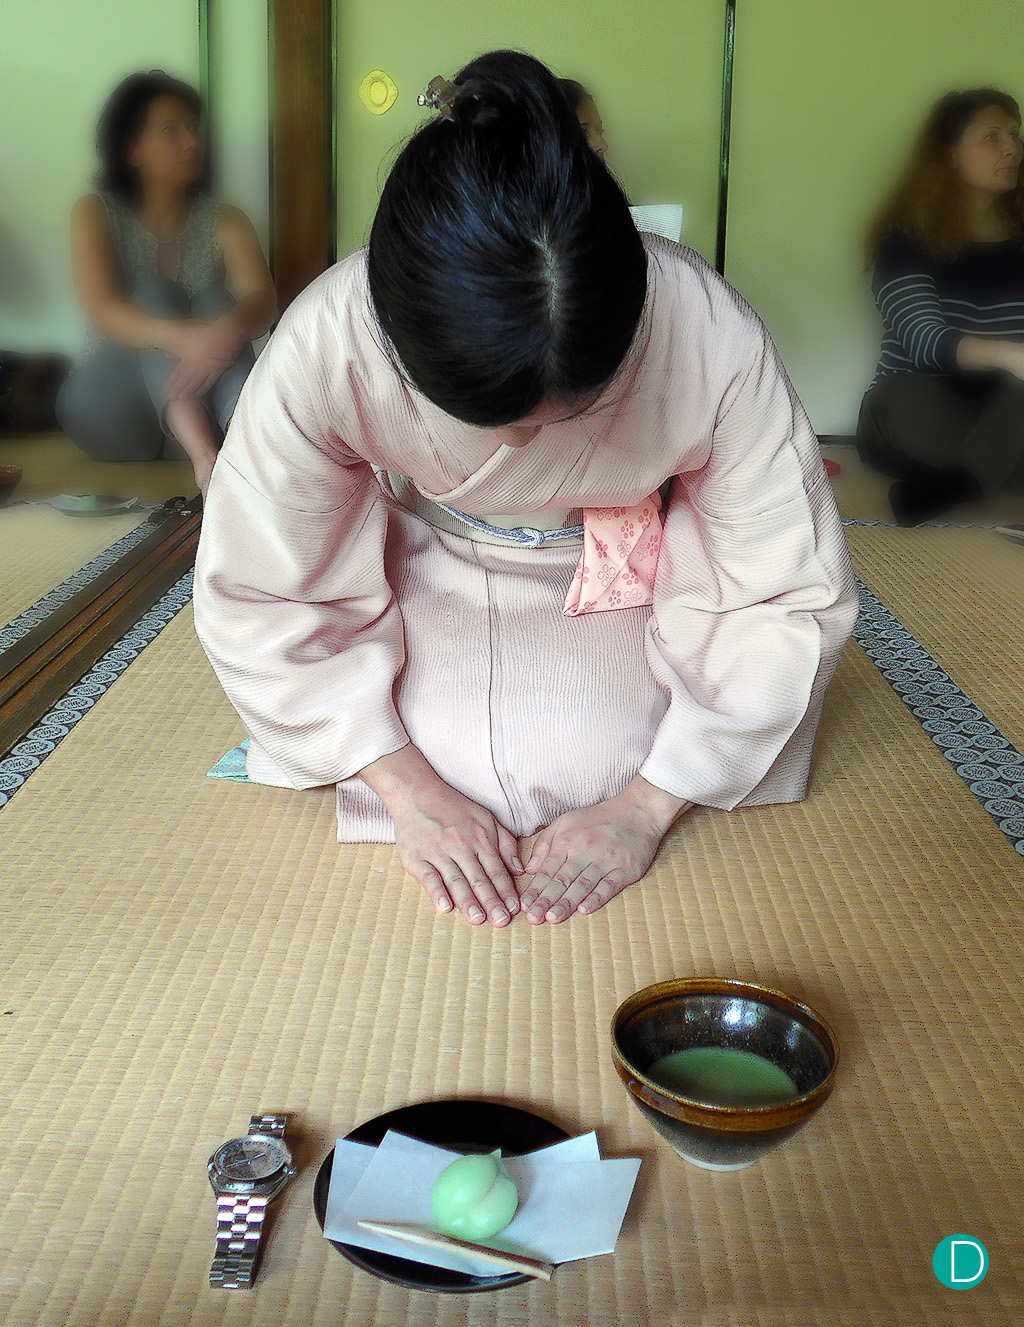 Tea is served. Traditional Japanese style. Note that during the ceremony, it is common for one to remove one's watch to denote that one is not encumbered by the burdens of life, and ready to partake of the spiritual experience. Tea is served with a small sweet cake.